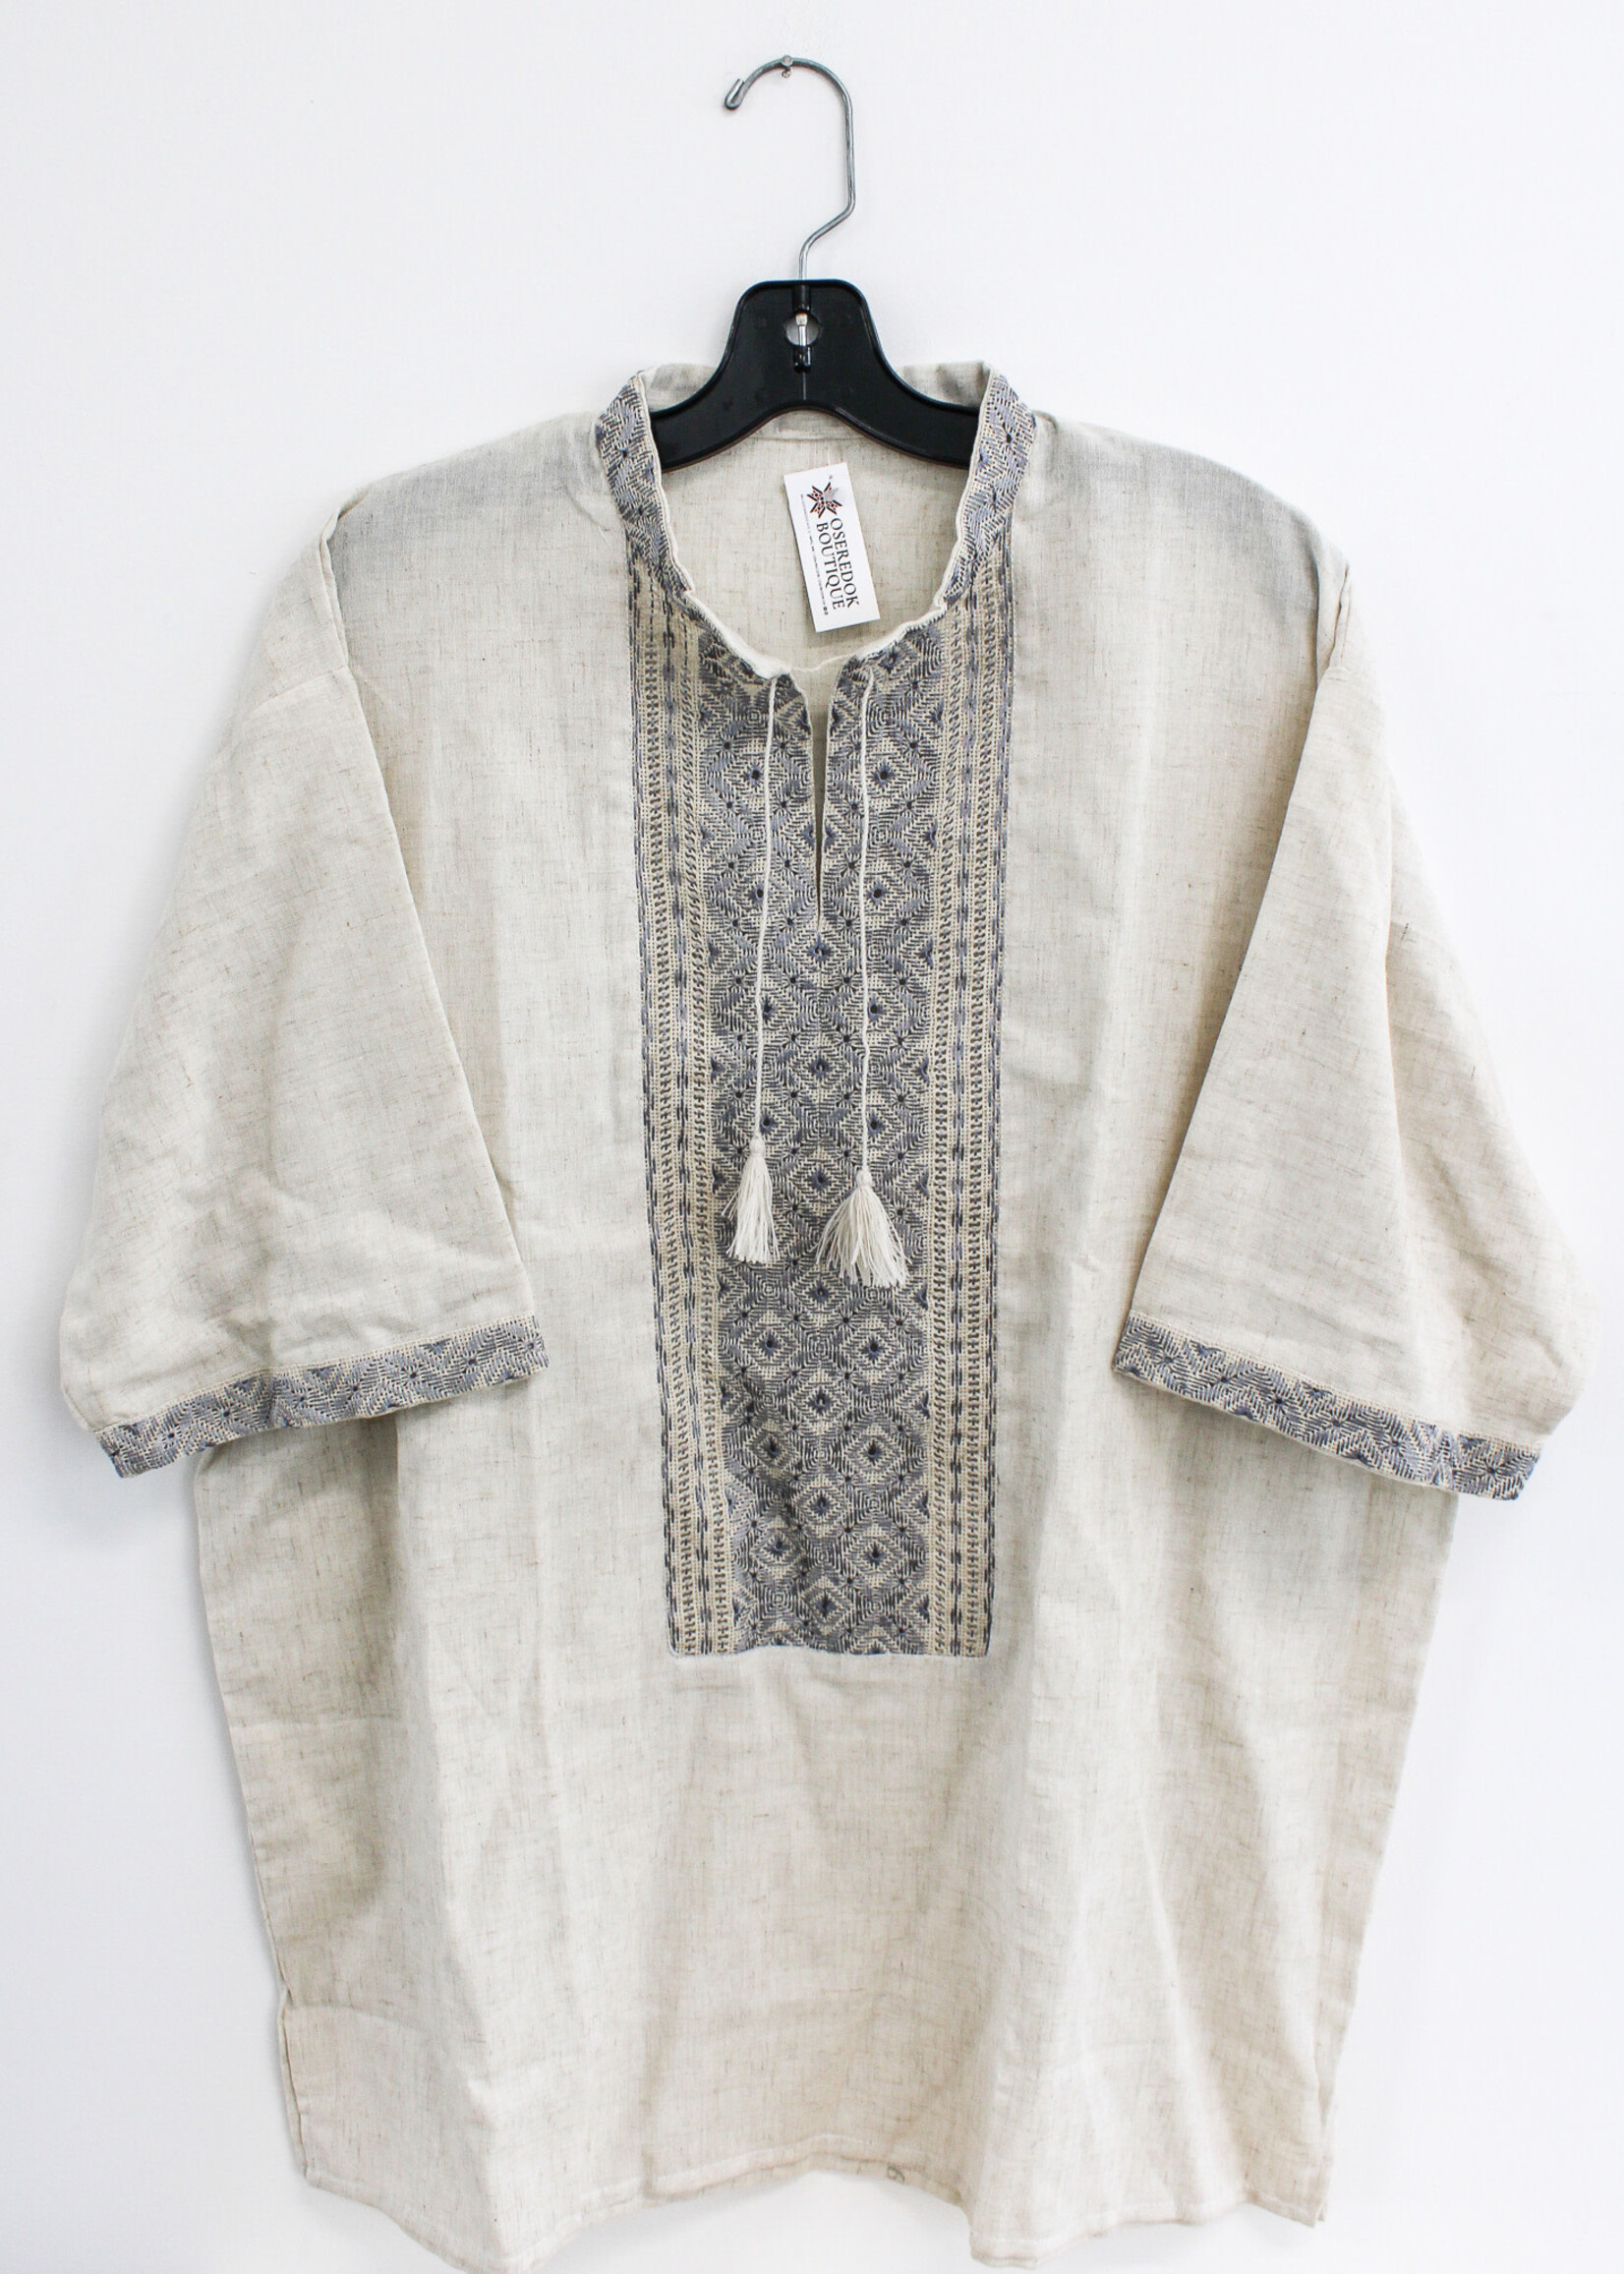 VYSHYVANKA(M)  - Chest 50 in. Length 31 in.  Cream linen, short sleeve/ blue embroidery